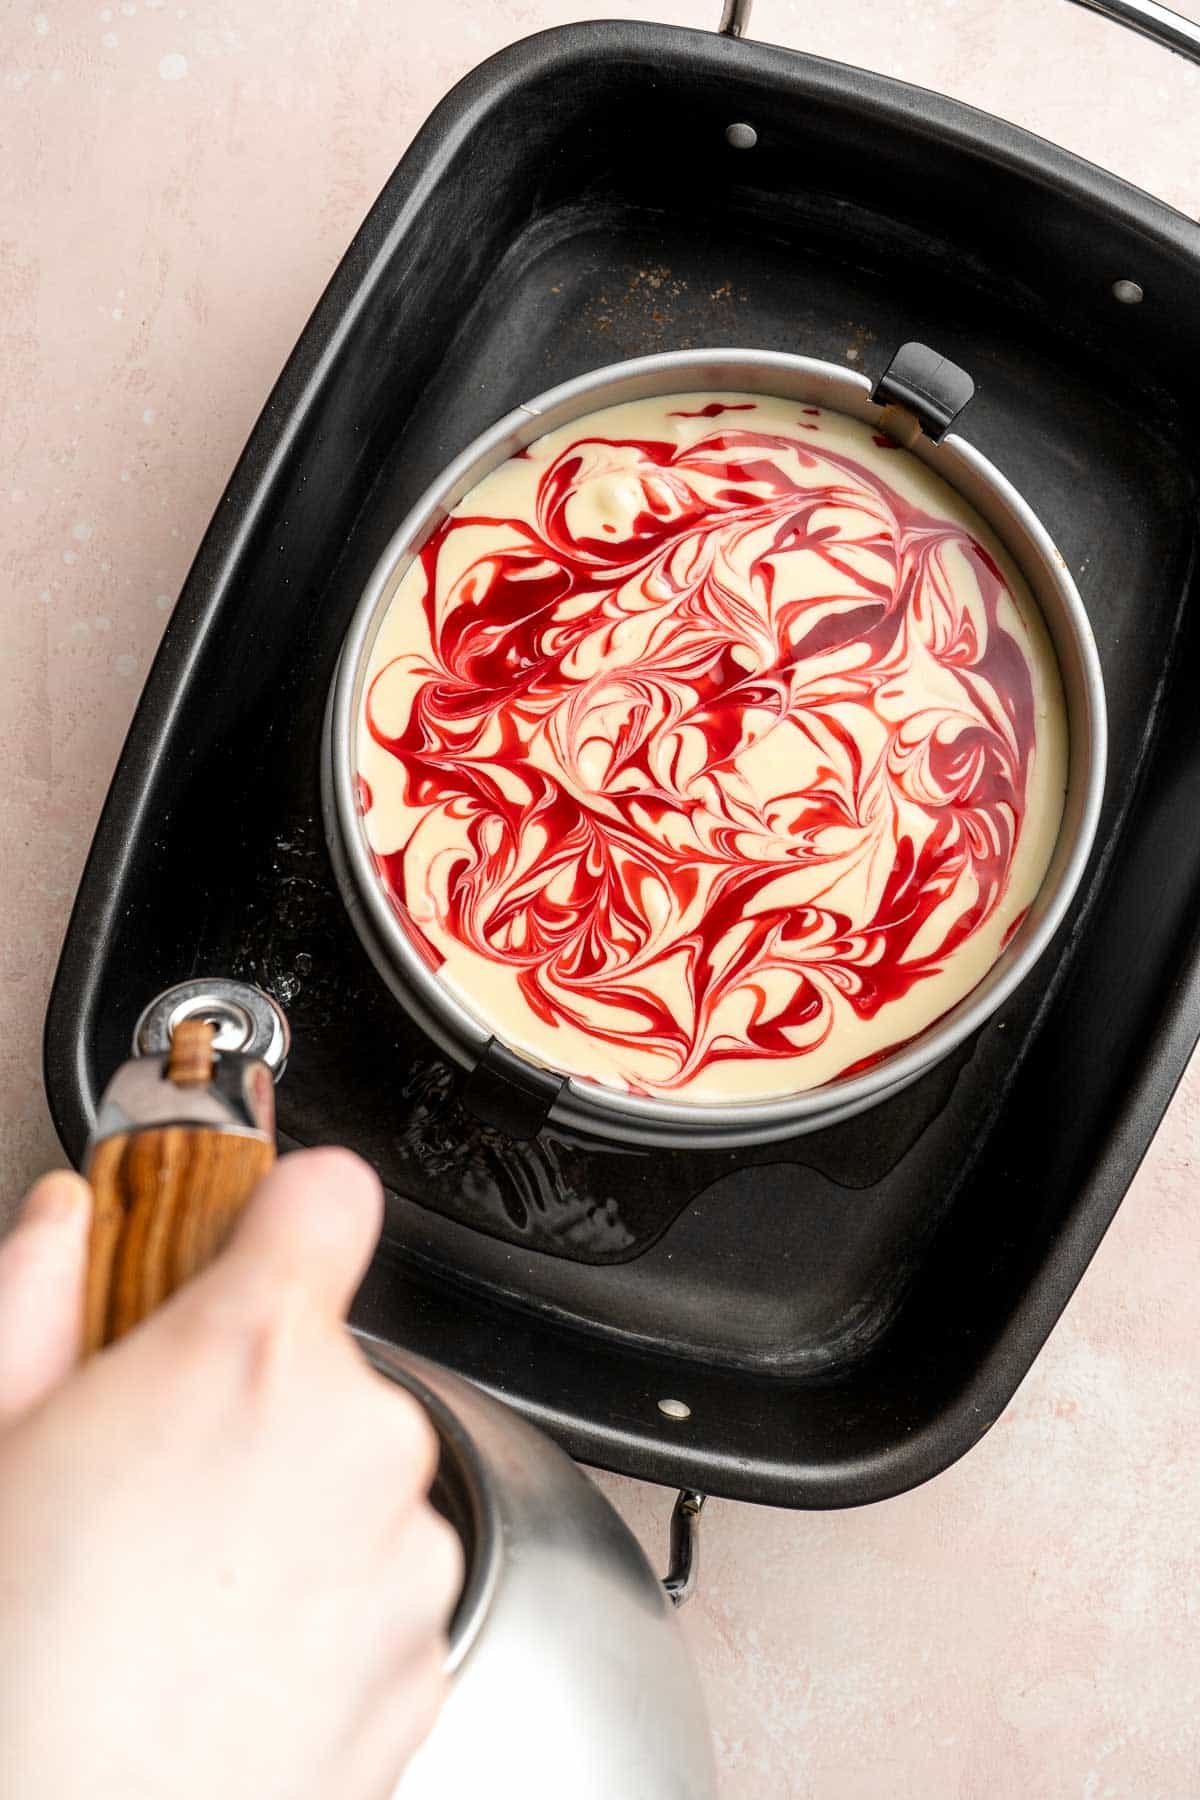 This White Chocolate Raspberry Cheesecake is so decadent, made with a creamy white chocolate cheesecake batter swirled with homemade raspberry sauce. | aheadofthyme.com